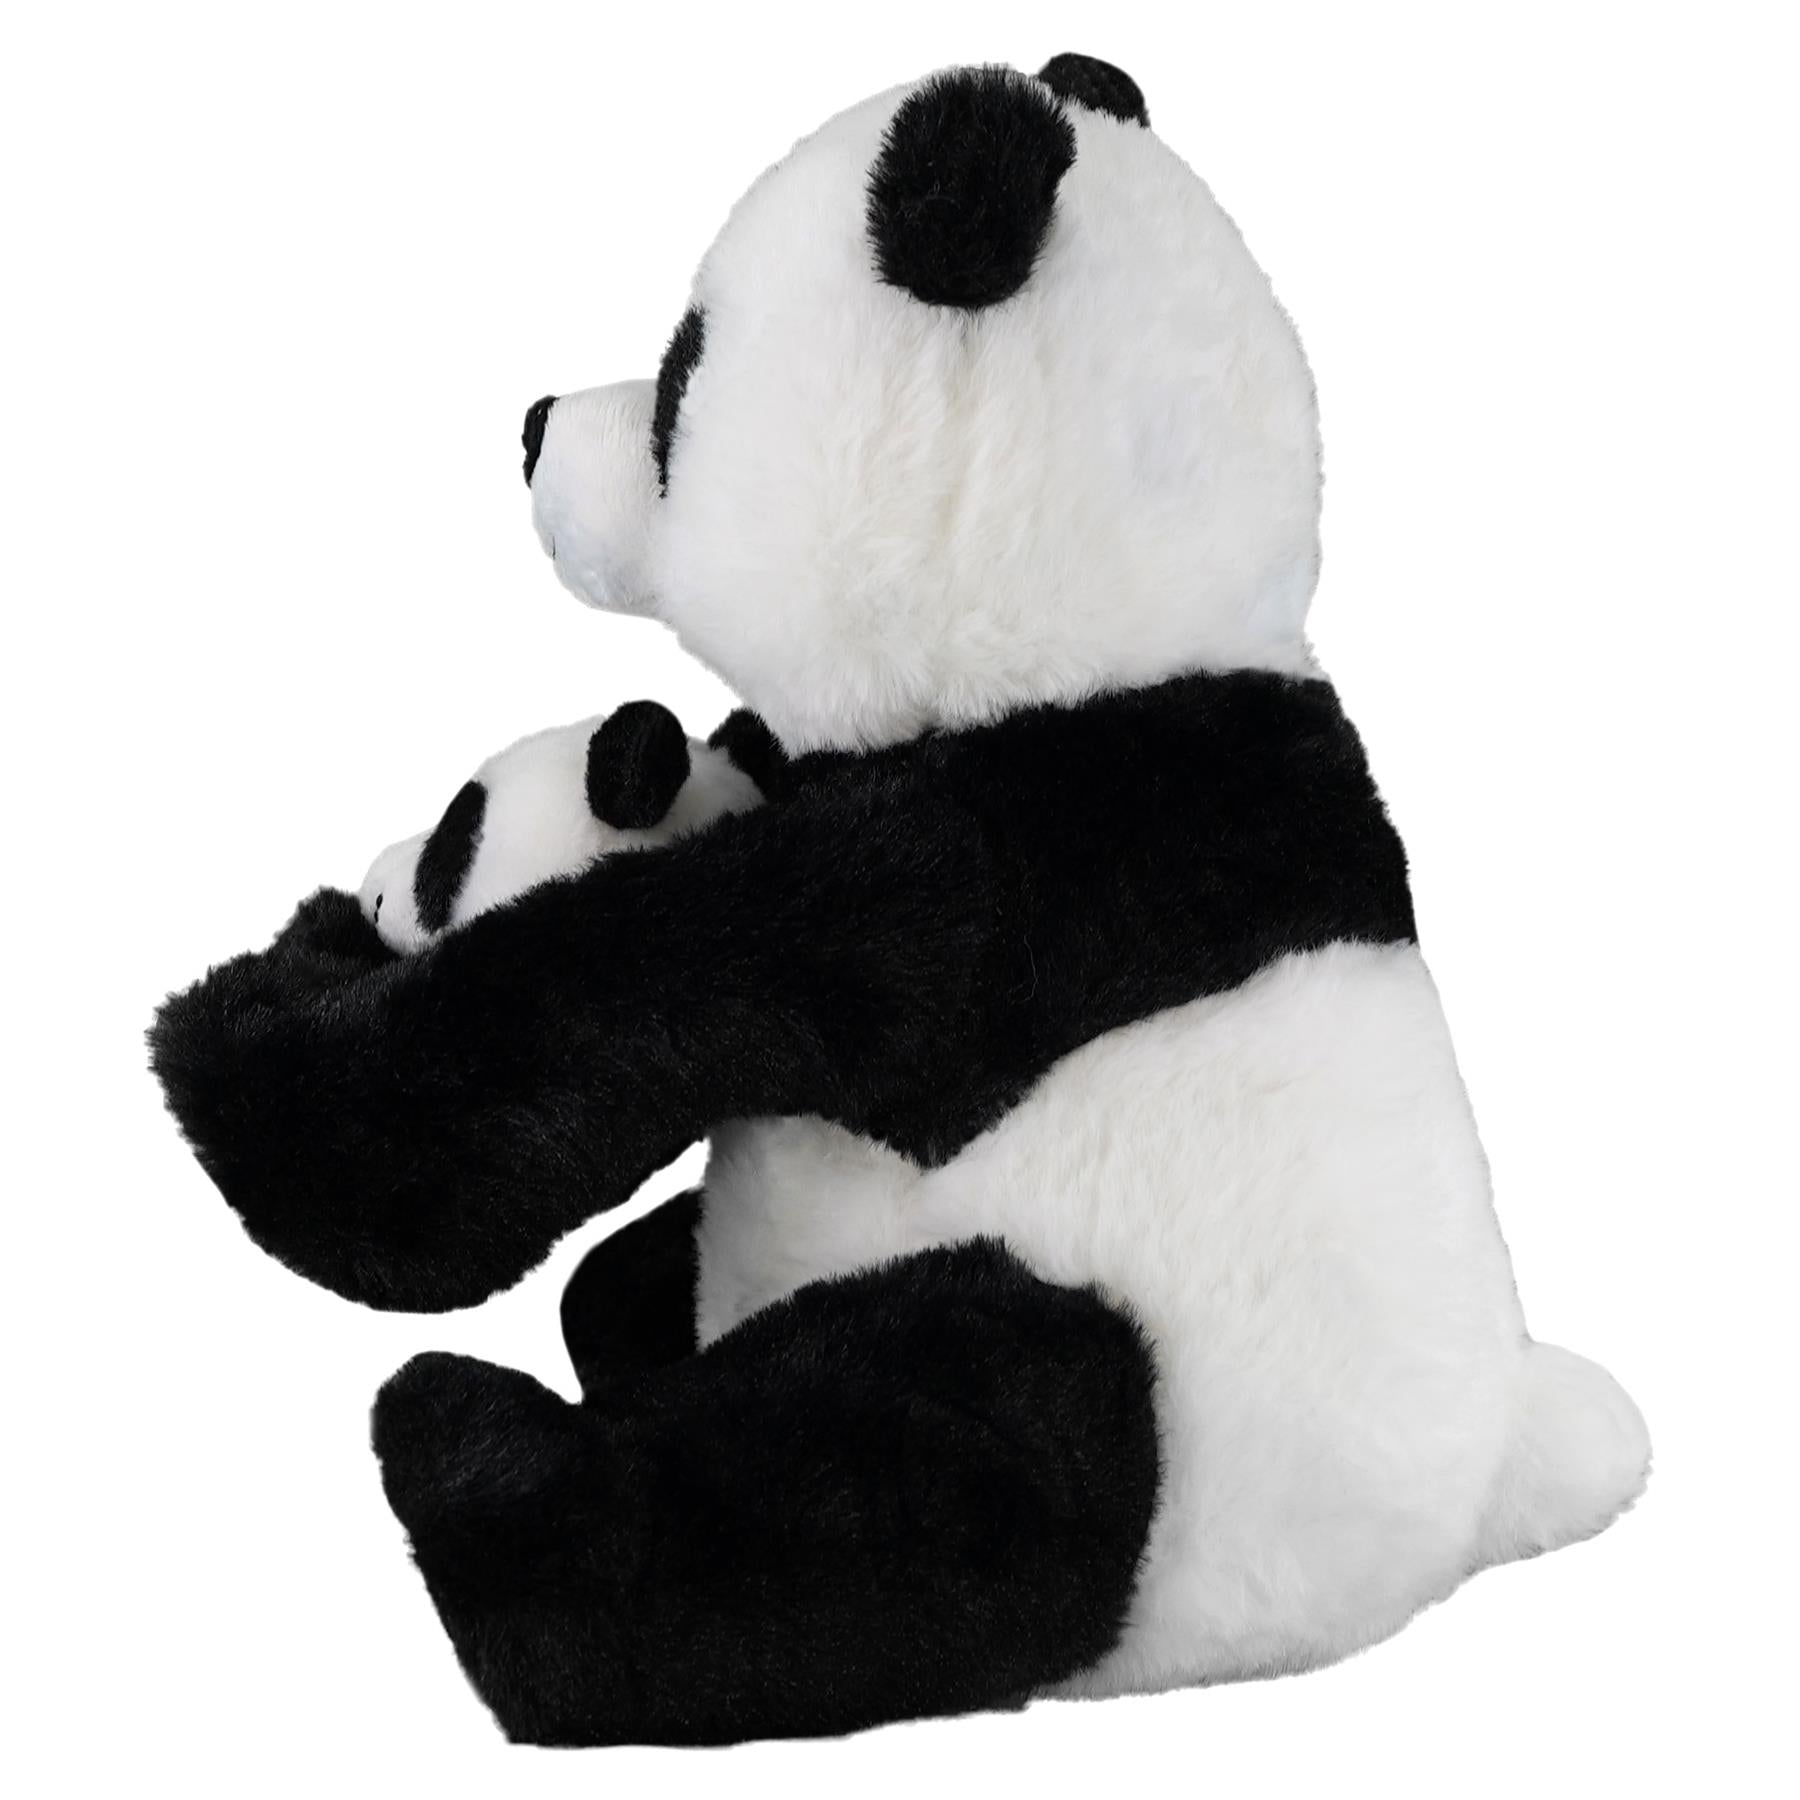 Super Soft Mommy & Baby Panda Plush Toy by The Magic Toy Shop - The Magic Toy Shop